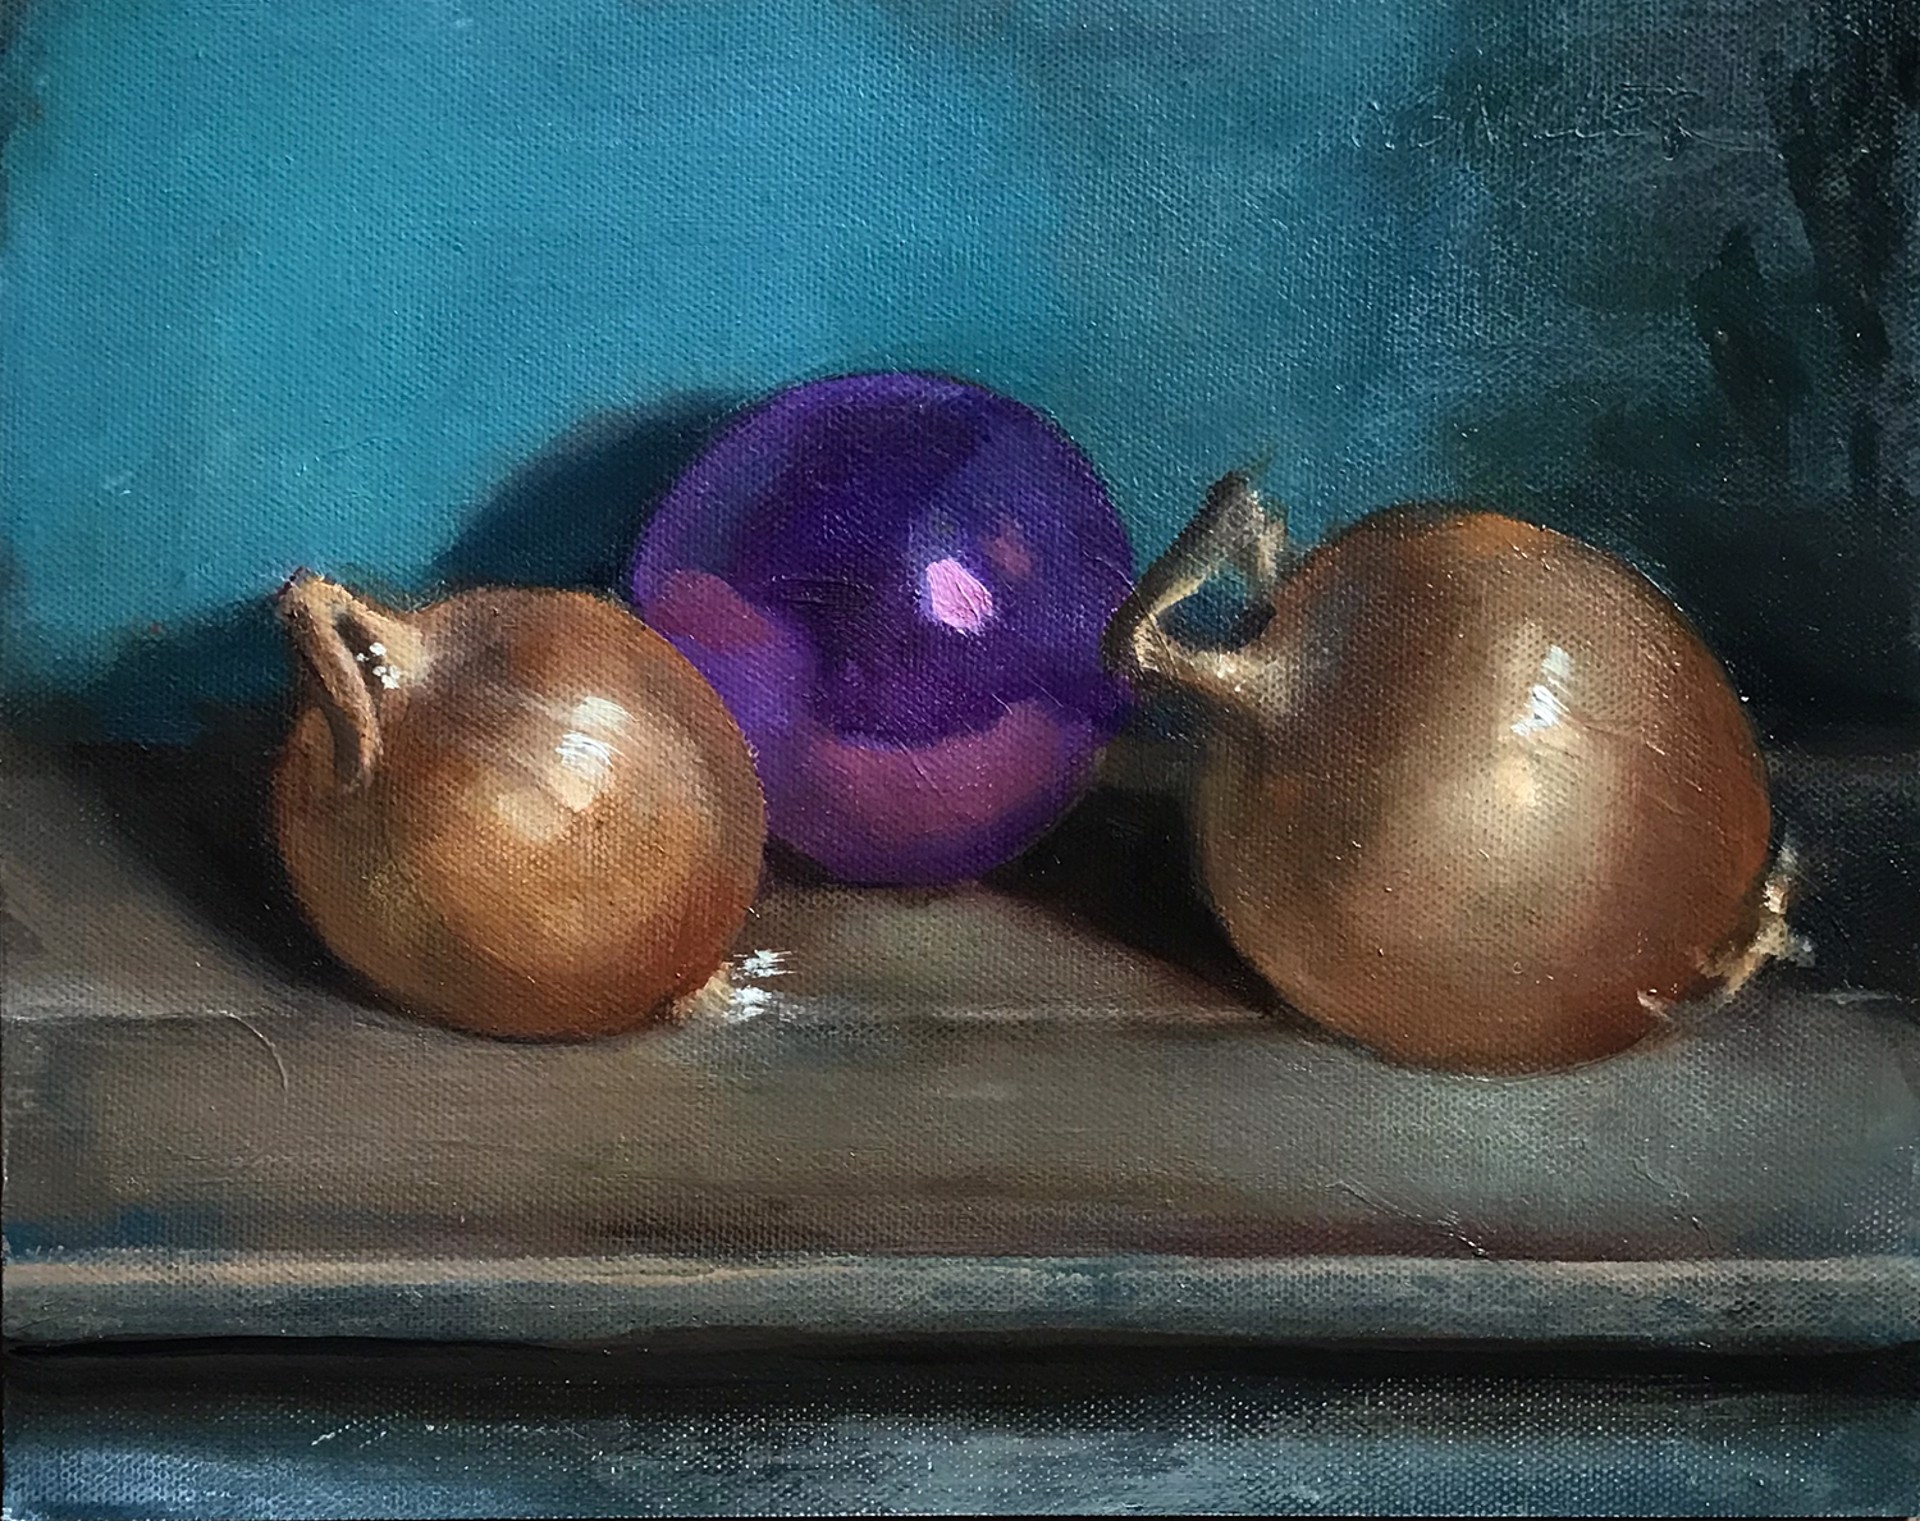 Onions and Ornament by Nancy Bea Miller